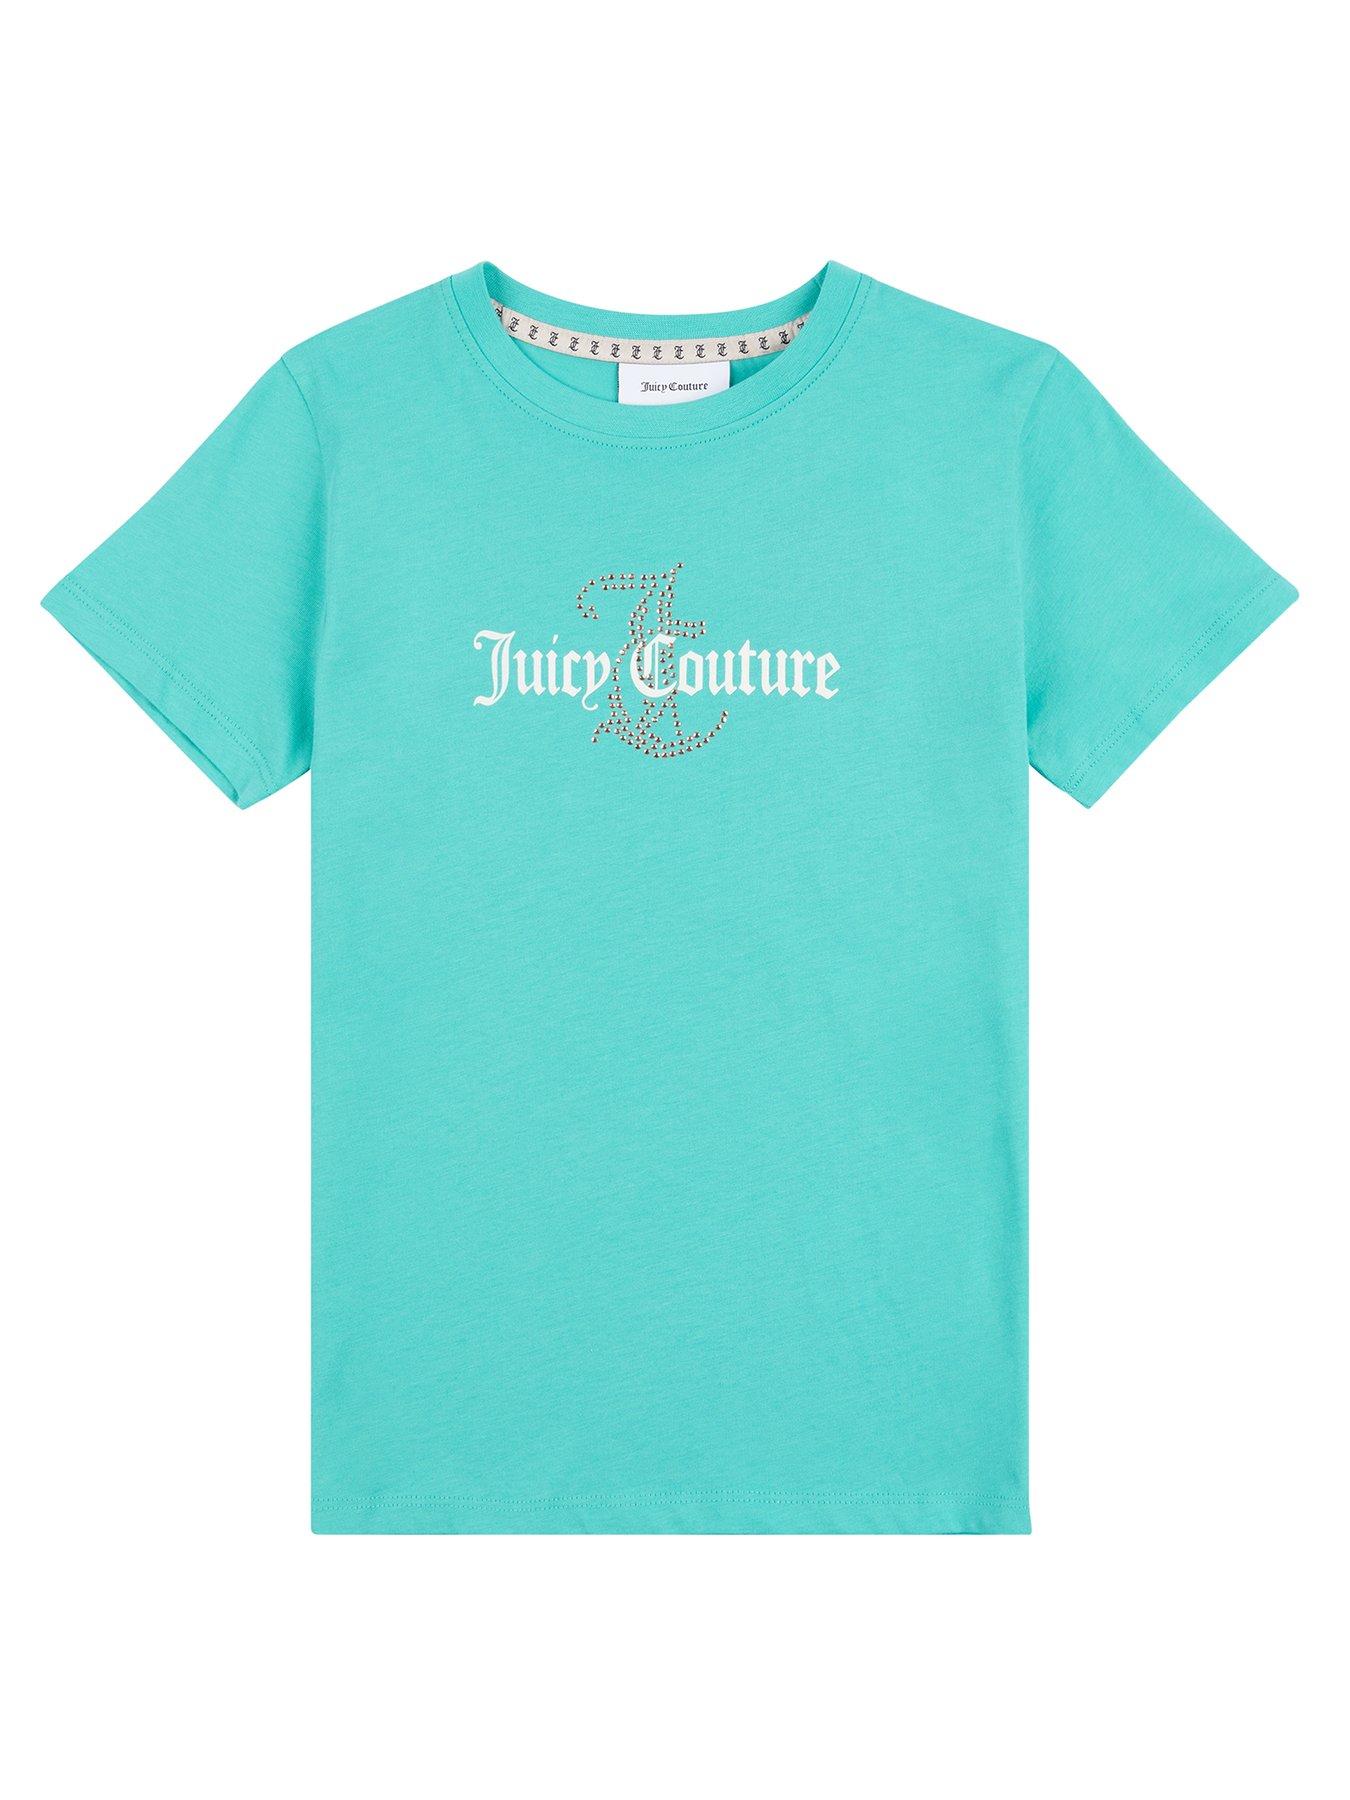 13/14 years, Under 30%, Juicy couture